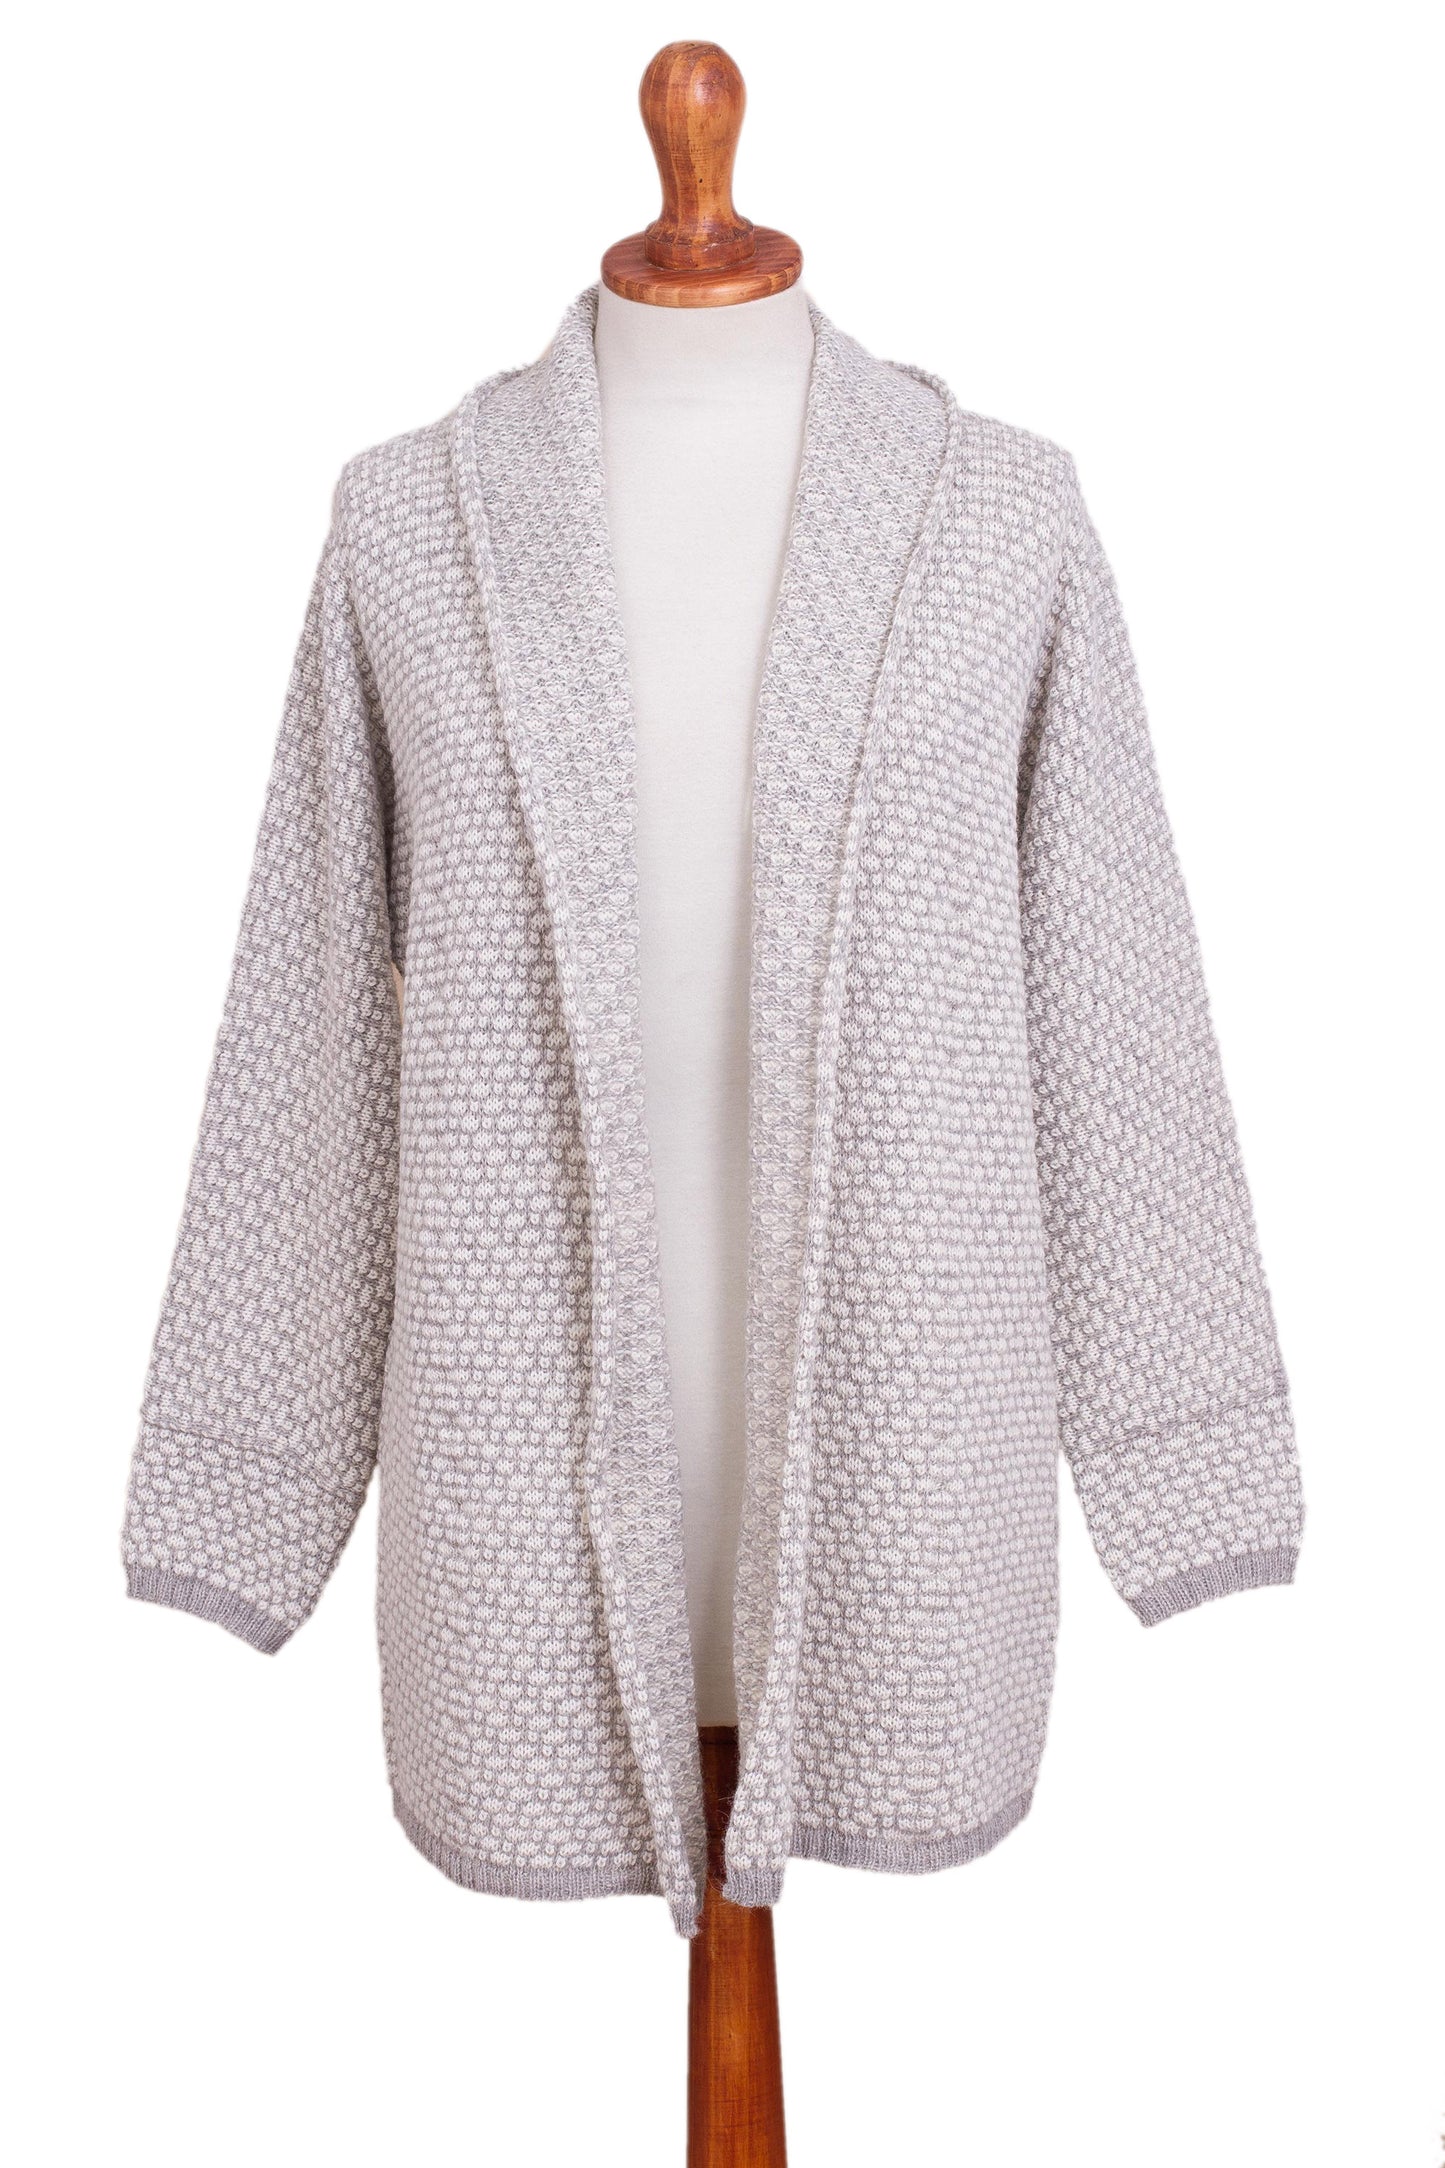 Dove Down Off-White and Grey Alpaca Blend Relaxed Fit Cardigan Sweater